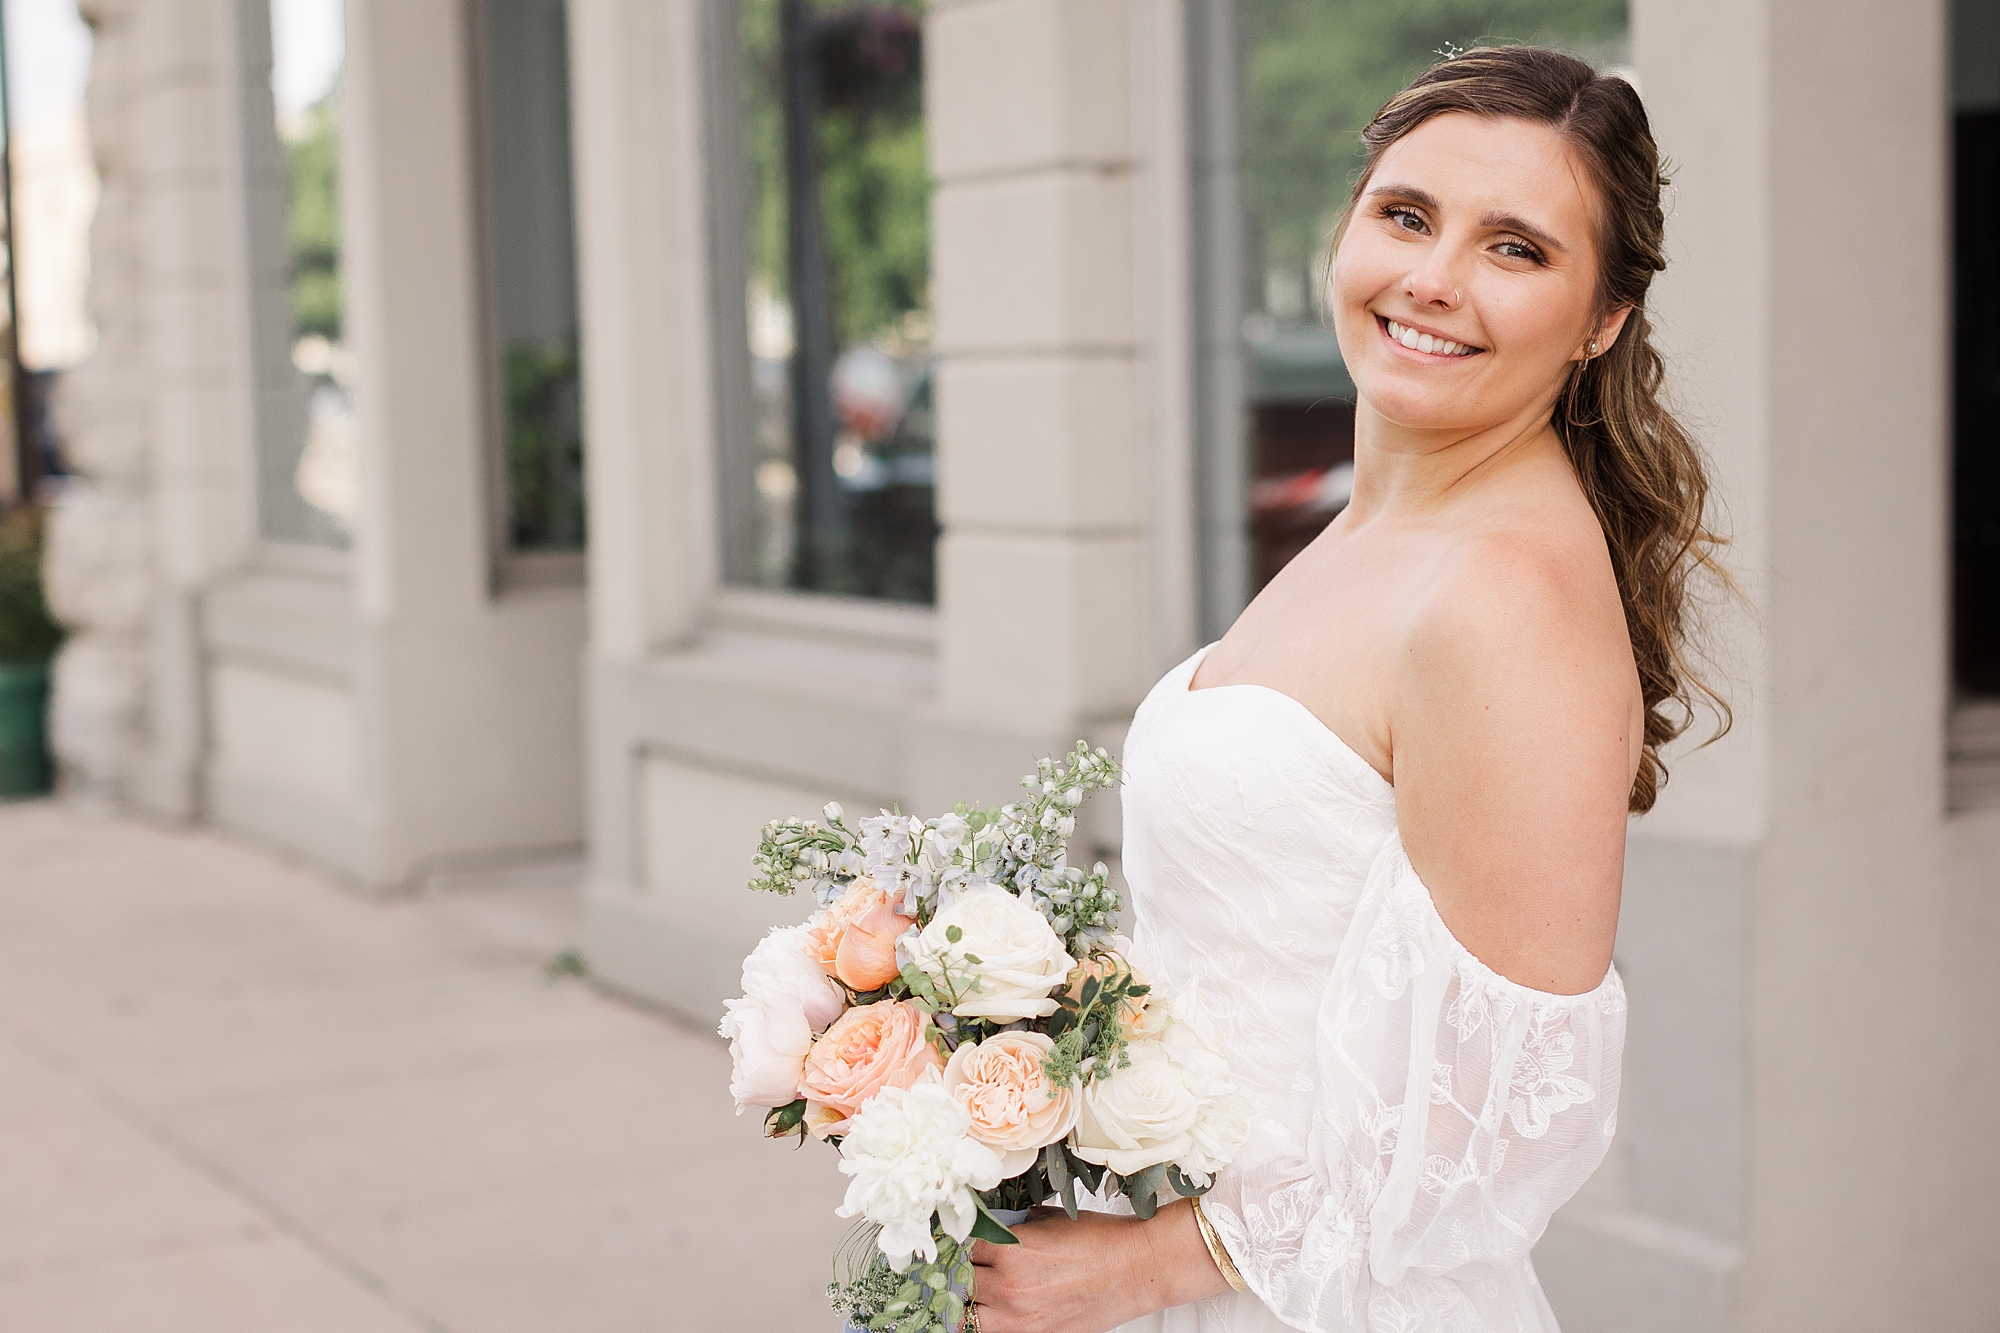 An Image of a smiling bride with glowing wedding day ready skin